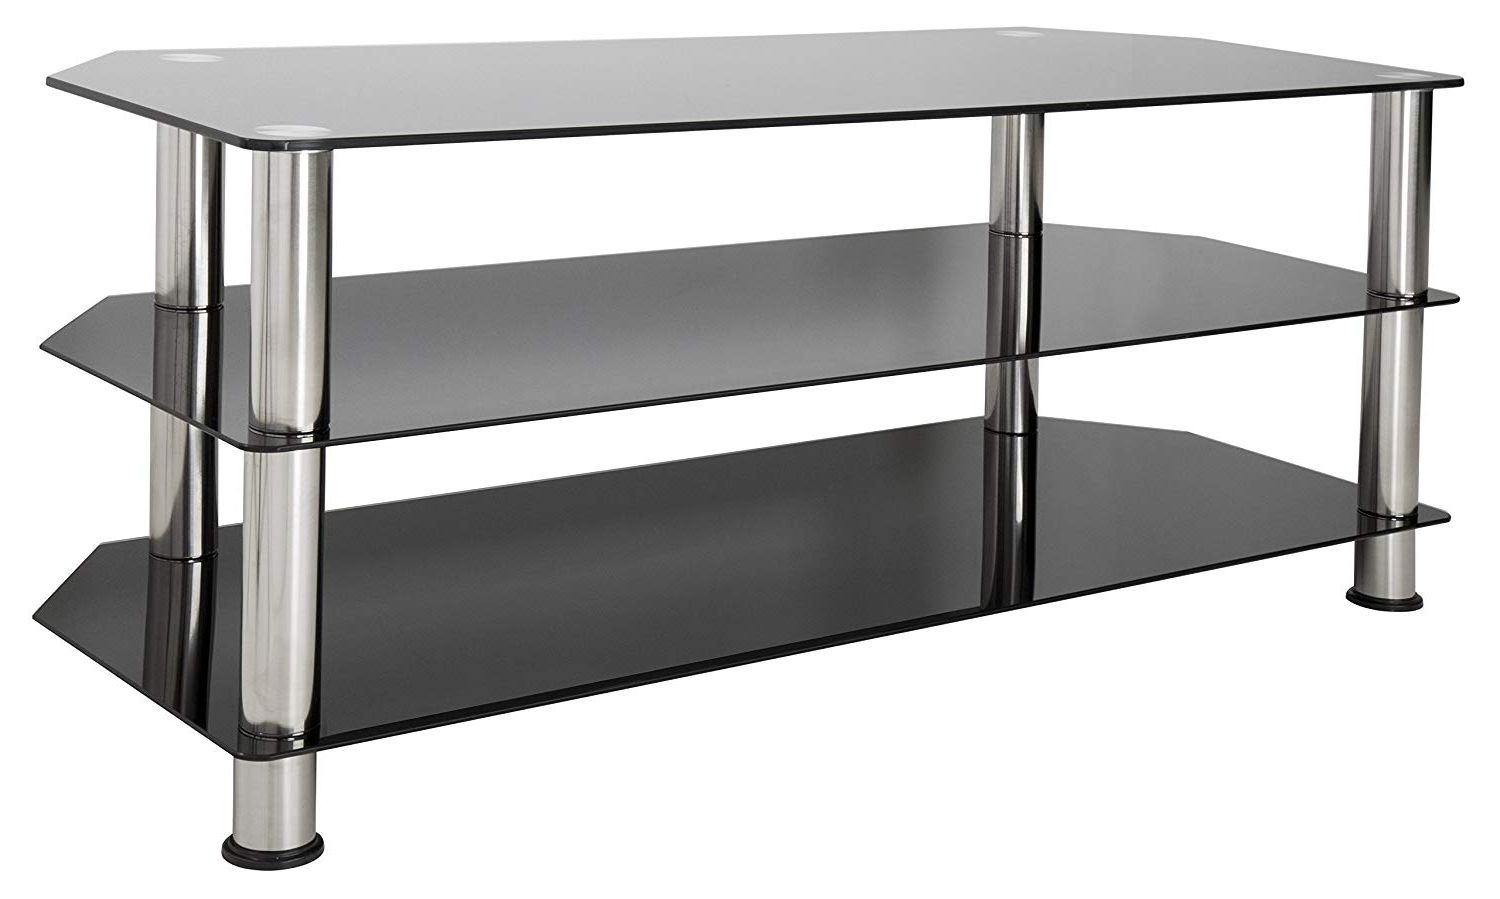 Well Liked Amazon: Avf Sdc1140 A Tv Stand For Up To 55 Inch Tvs, Black Inside Black Glass Tv Stands (Photo 2 of 20)